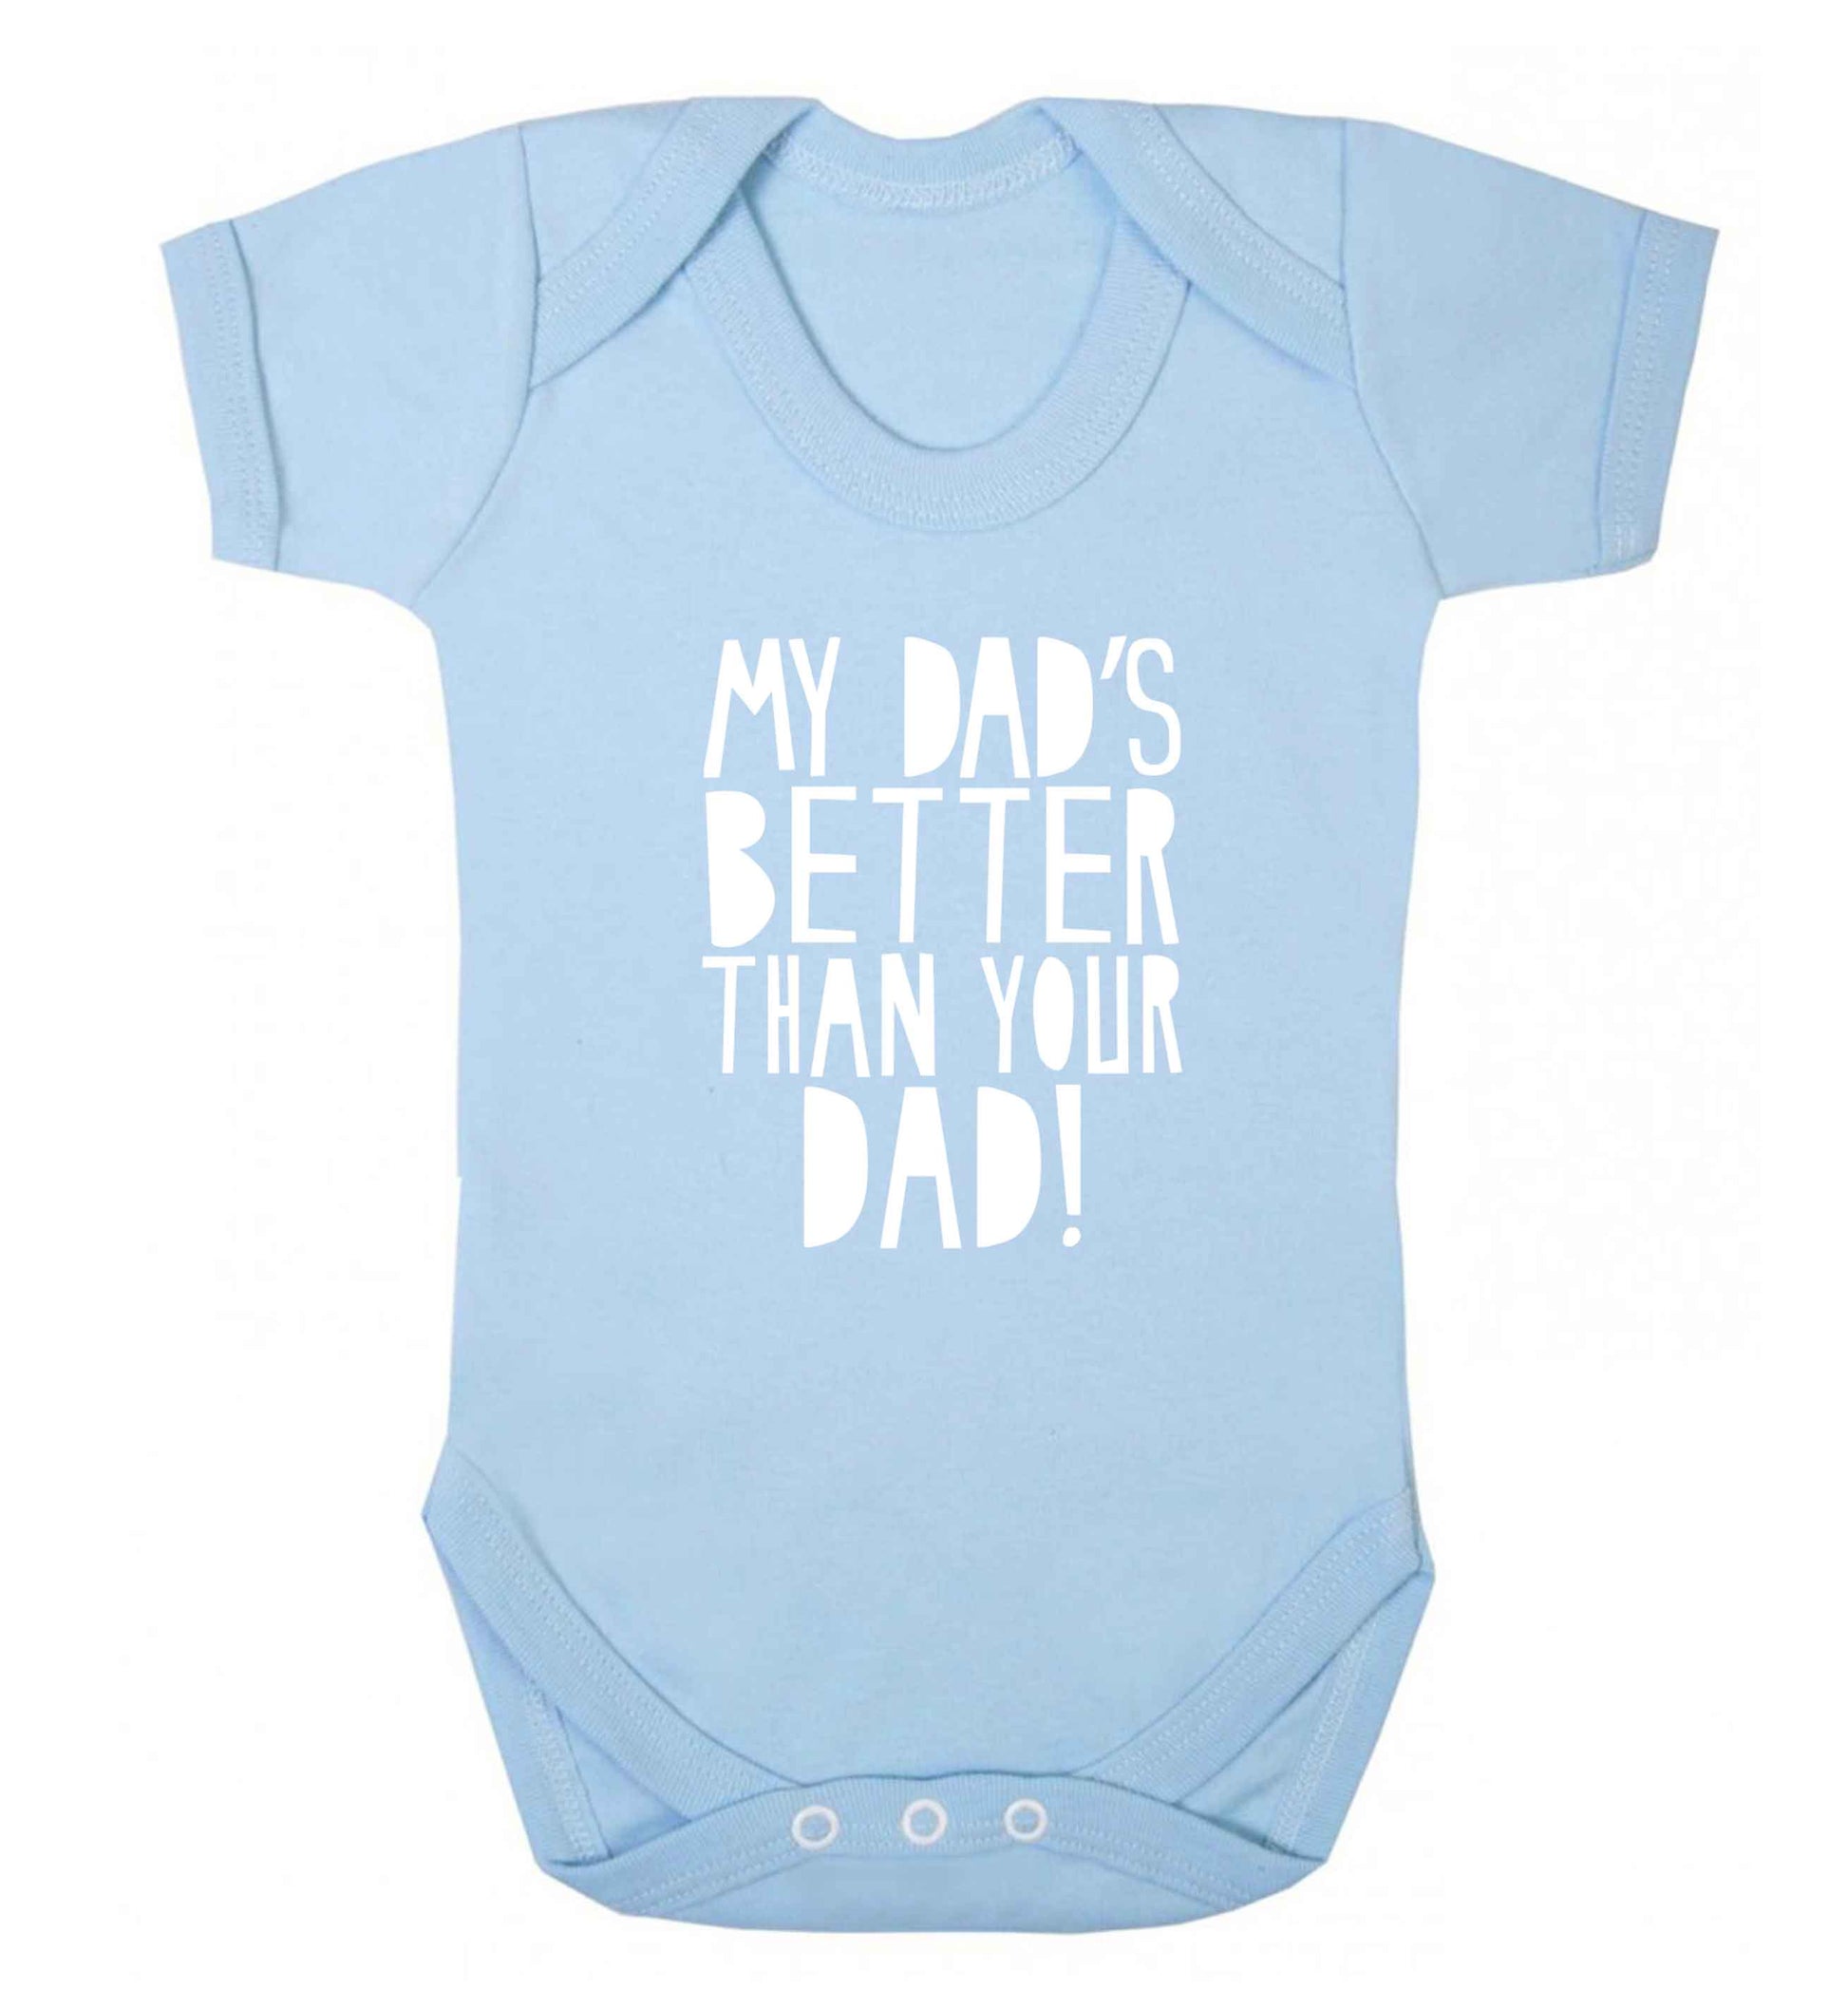 My dad's better than your dad! baby vest pale blue 18-24 months